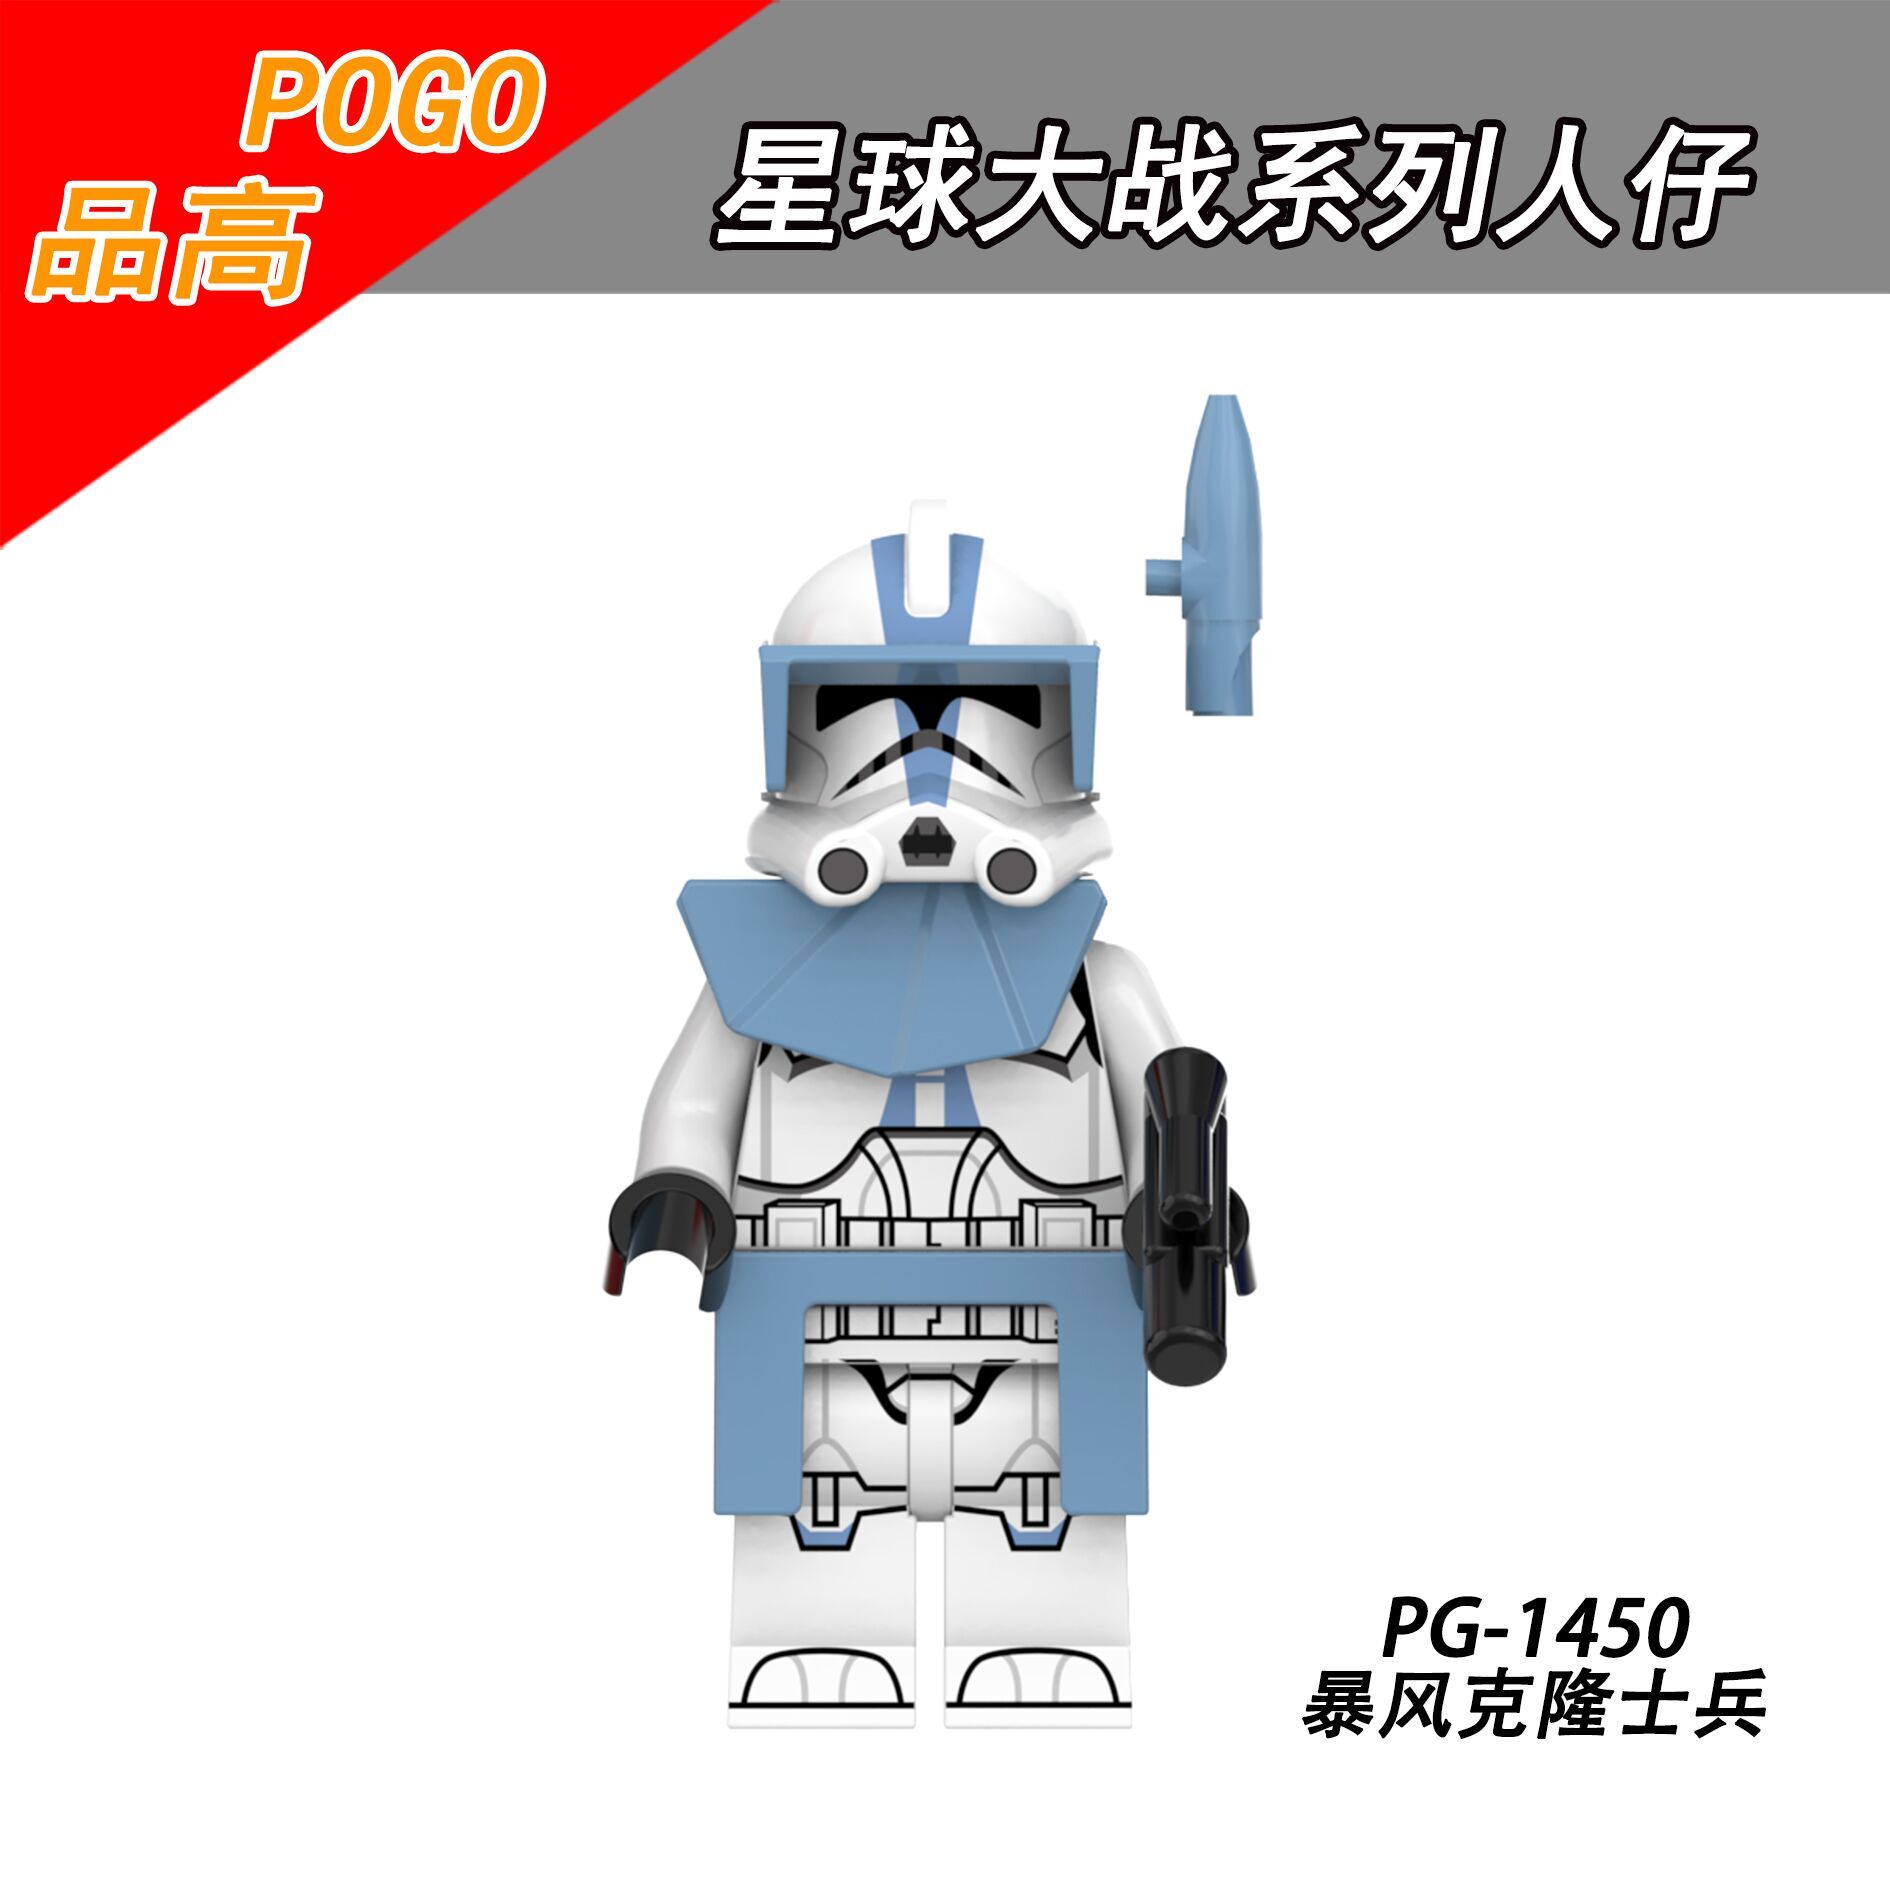 PG1449 PG1450 PG1451 PG1452 PG1453 PG1454 PG1455 PG1456 PG8293 Star Wars Clone Strooper Building Blocks Bricks Movie Series Action Educational Toys for Kids Gifts 